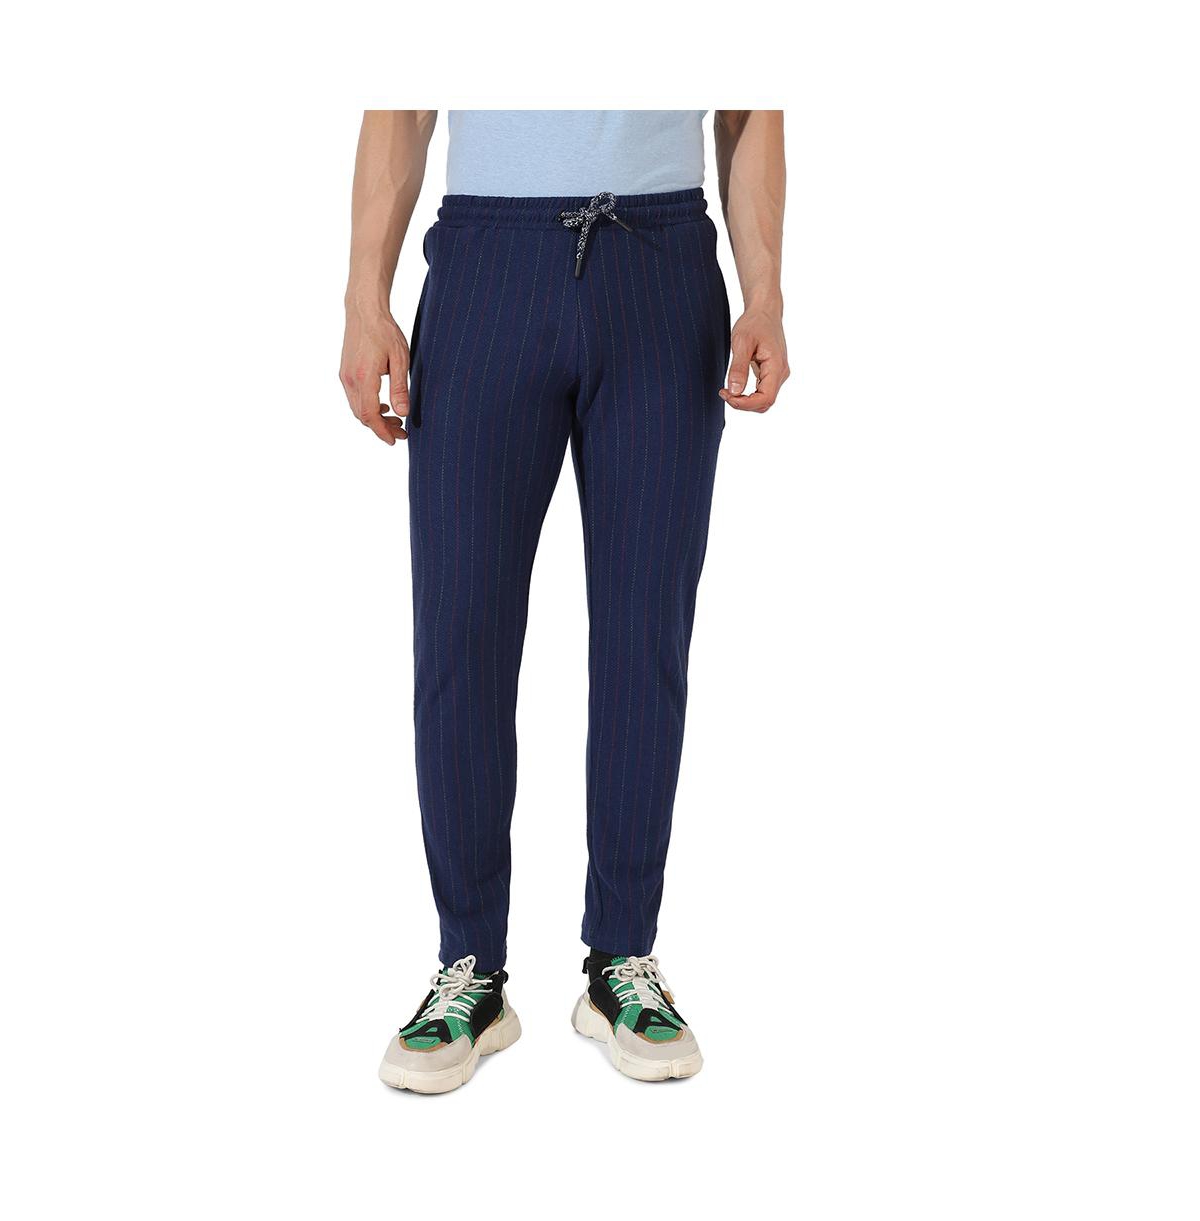 Campus Sutra Men's Navy Blue Unbalanced Striped Casual Joggers